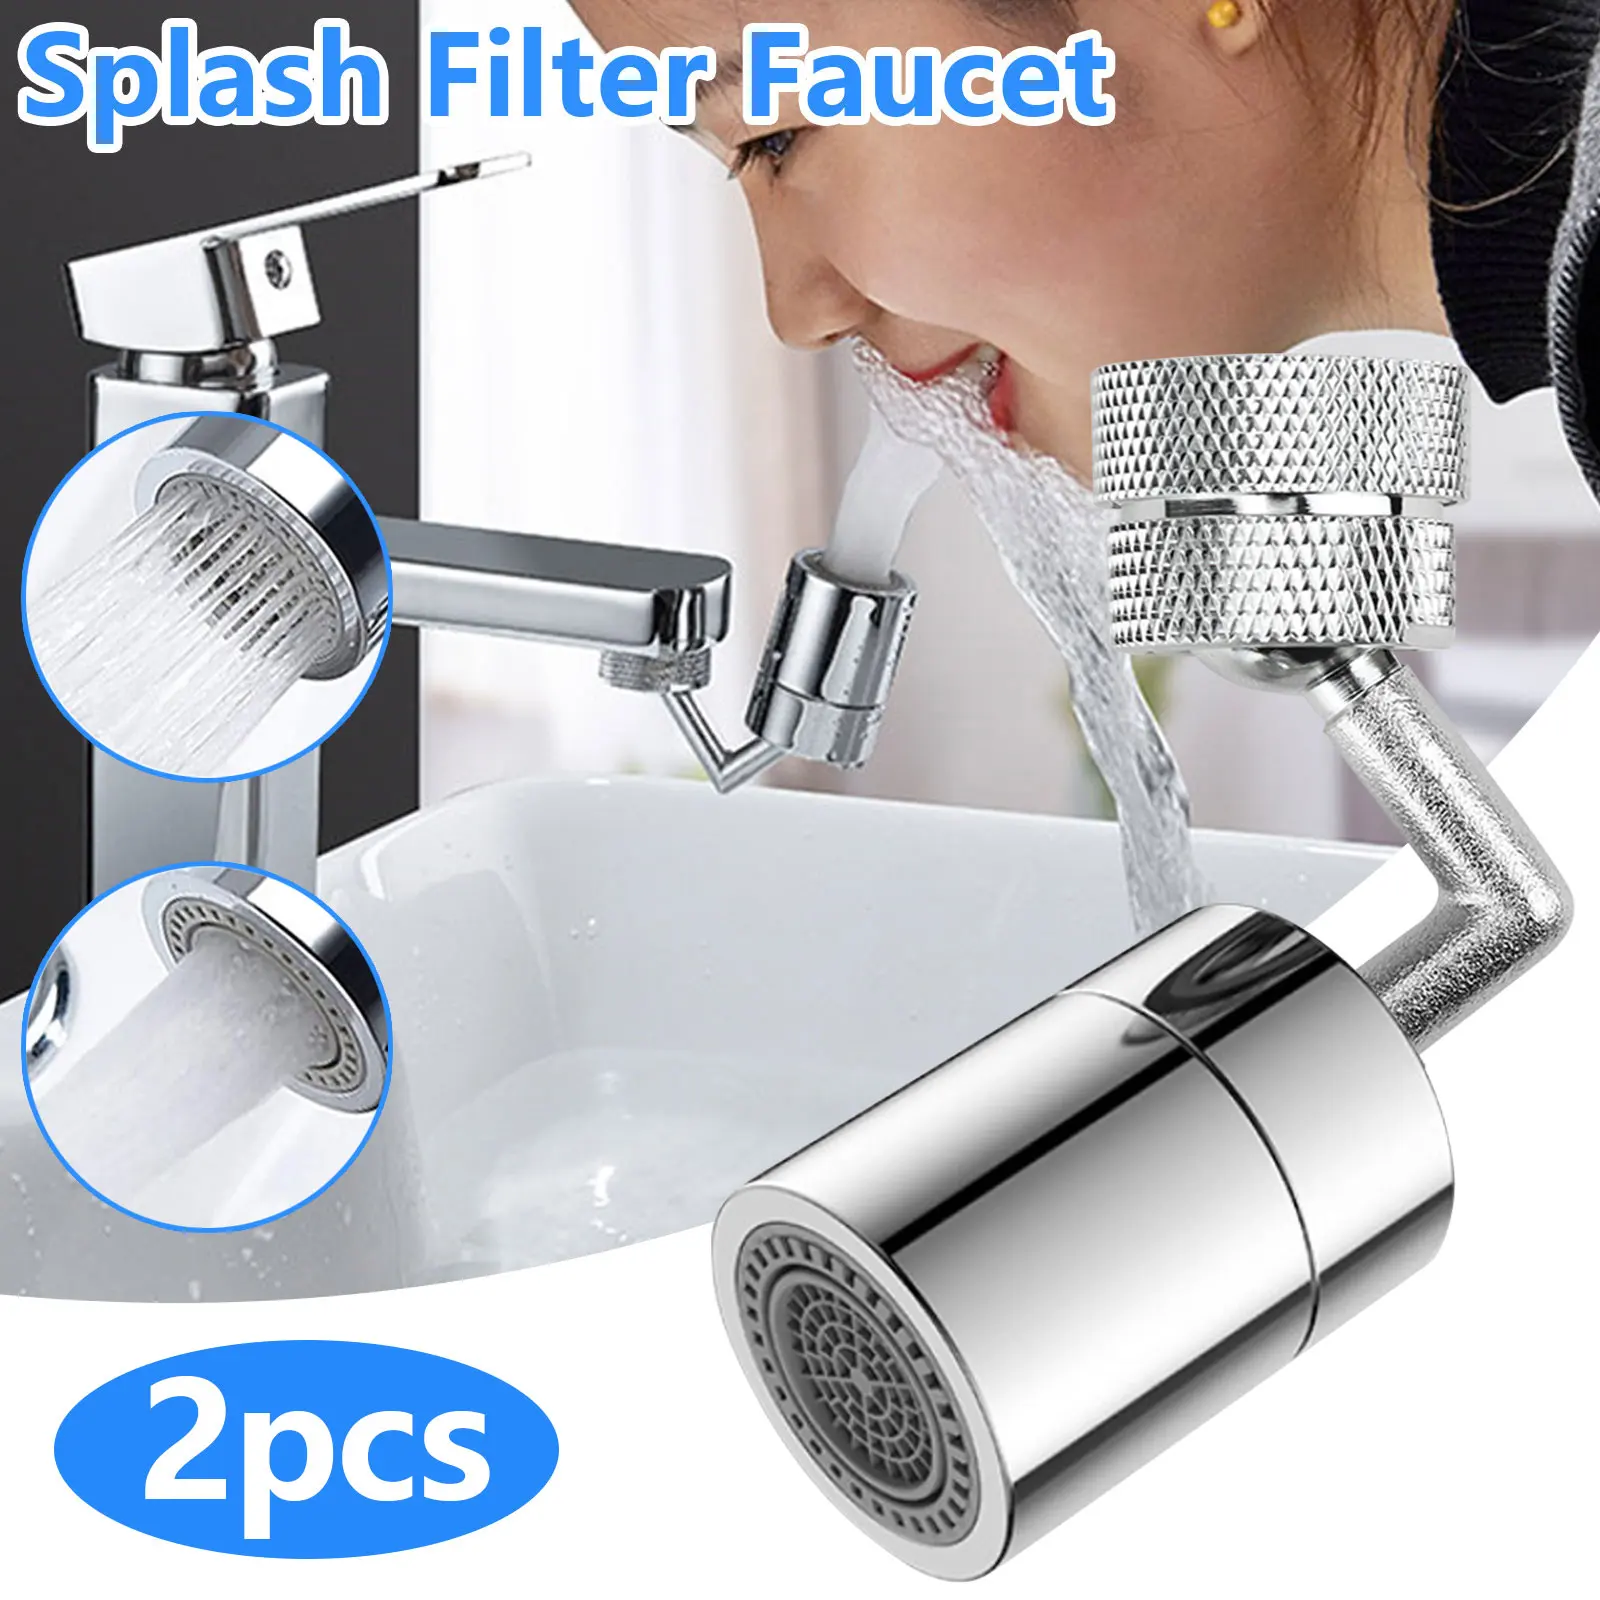 

Universal Rotation Faucet Head Dual Mode Splash Filter Tap Spray Foamer Aerator Nozzle with Textured Nuts Behogar faucet